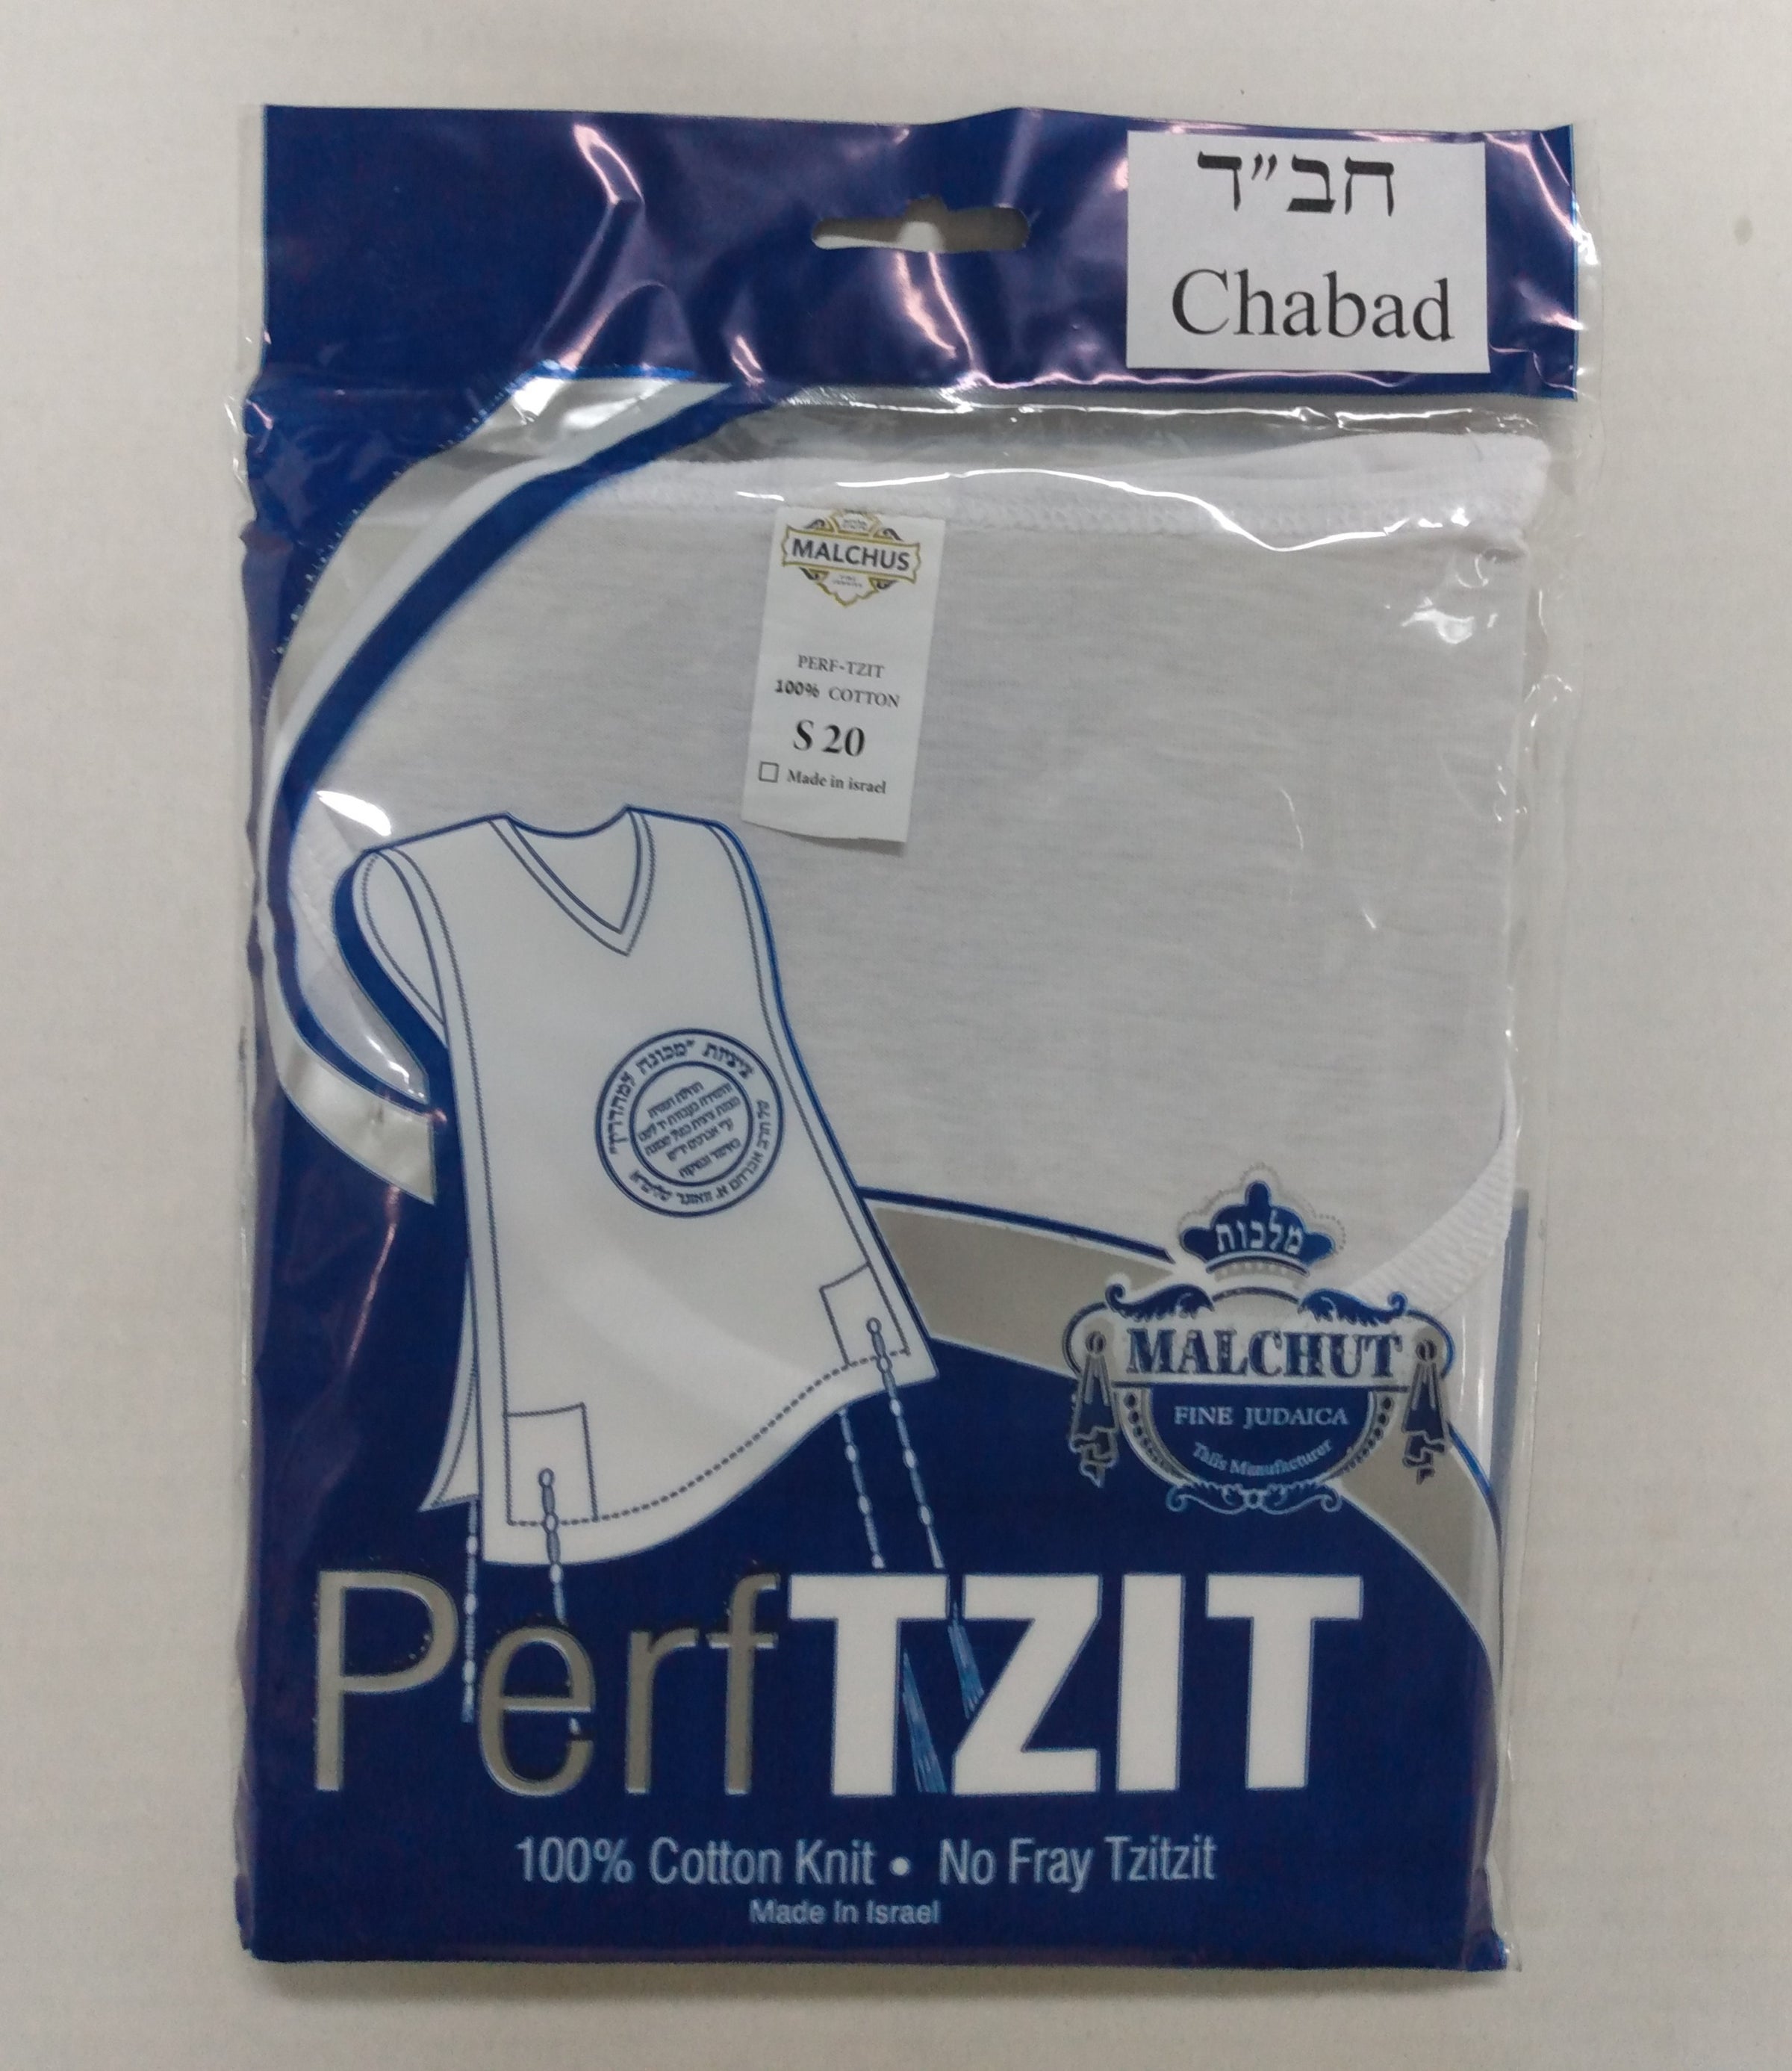 T-Shirt with Tzitzit Attached Adult Size - White